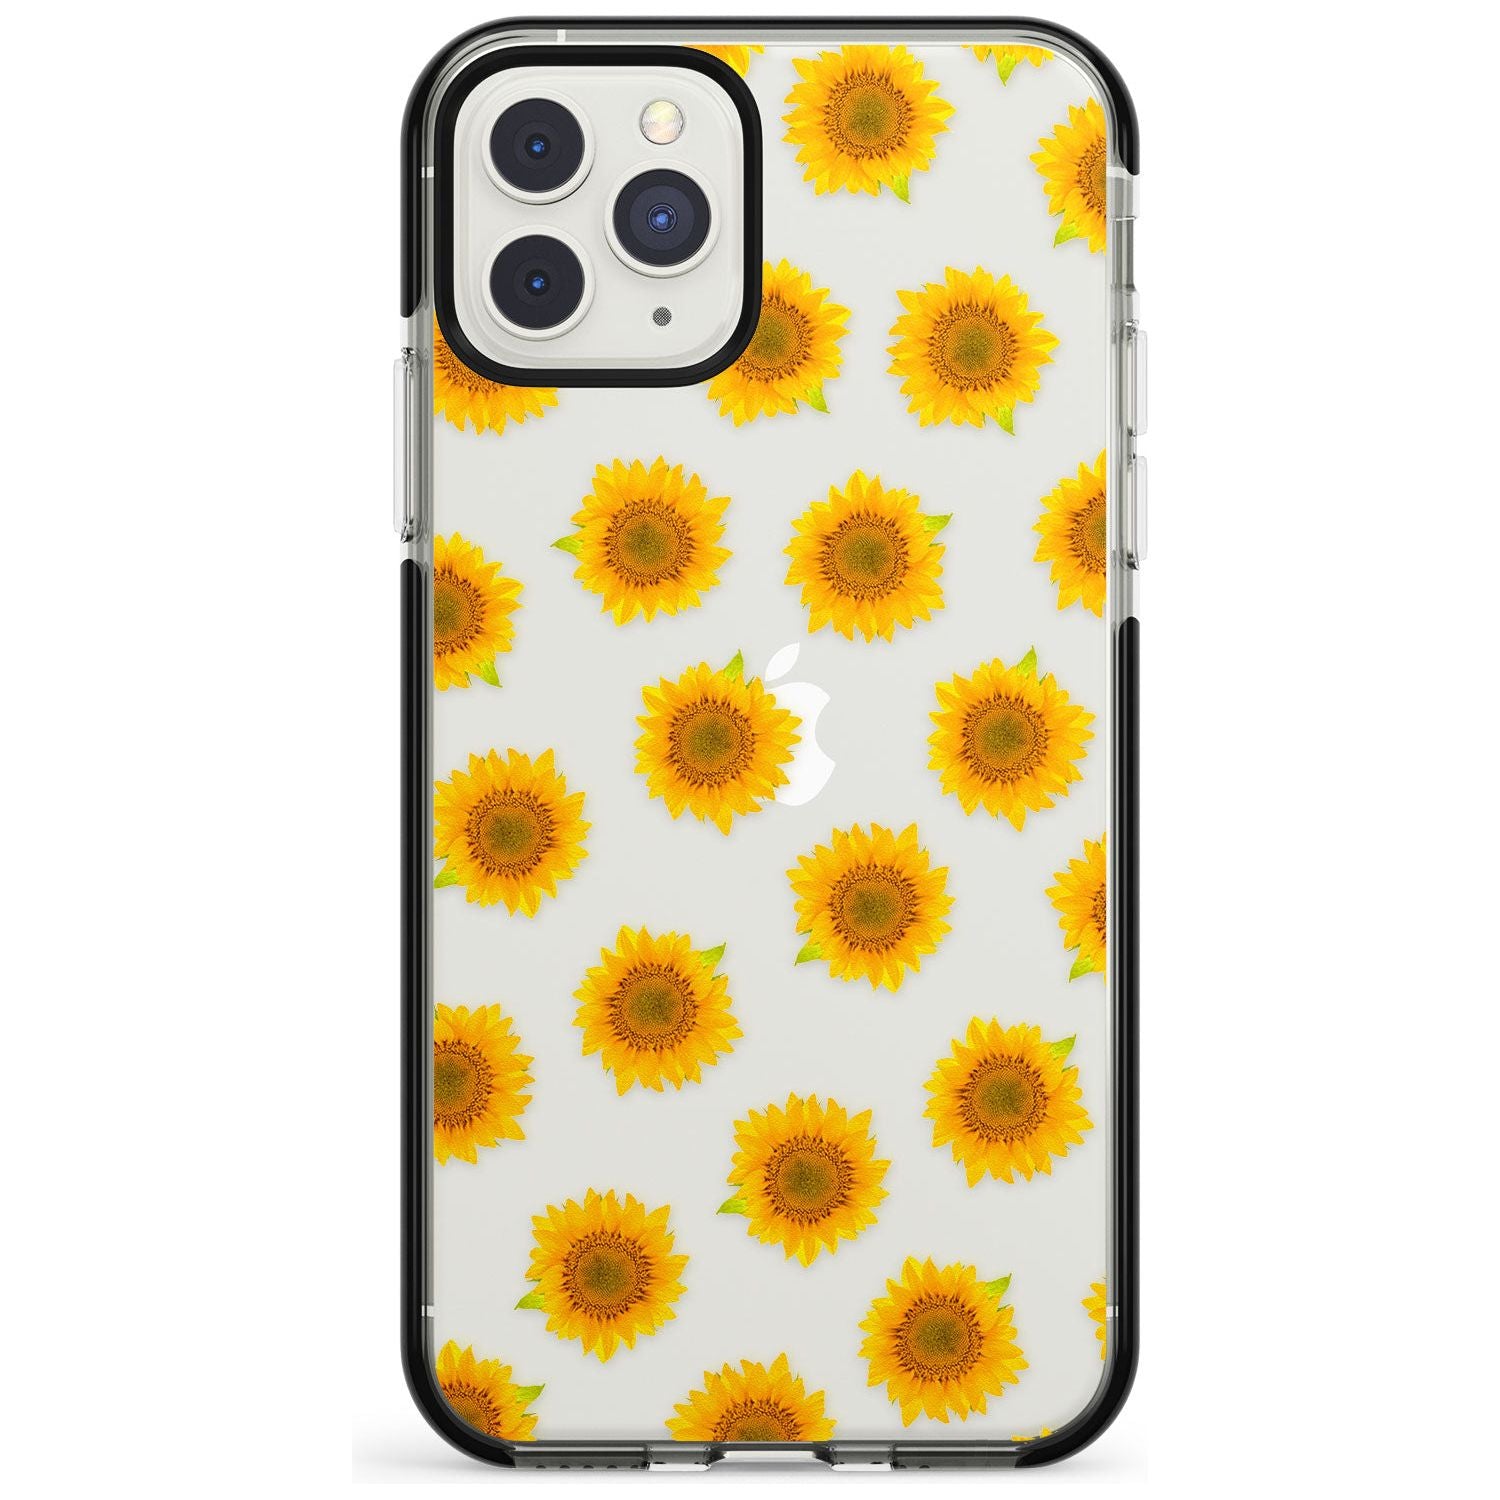 Sunflowers Transparent Pattern Black Impact Phone Case for iPhone 11 Pro Max